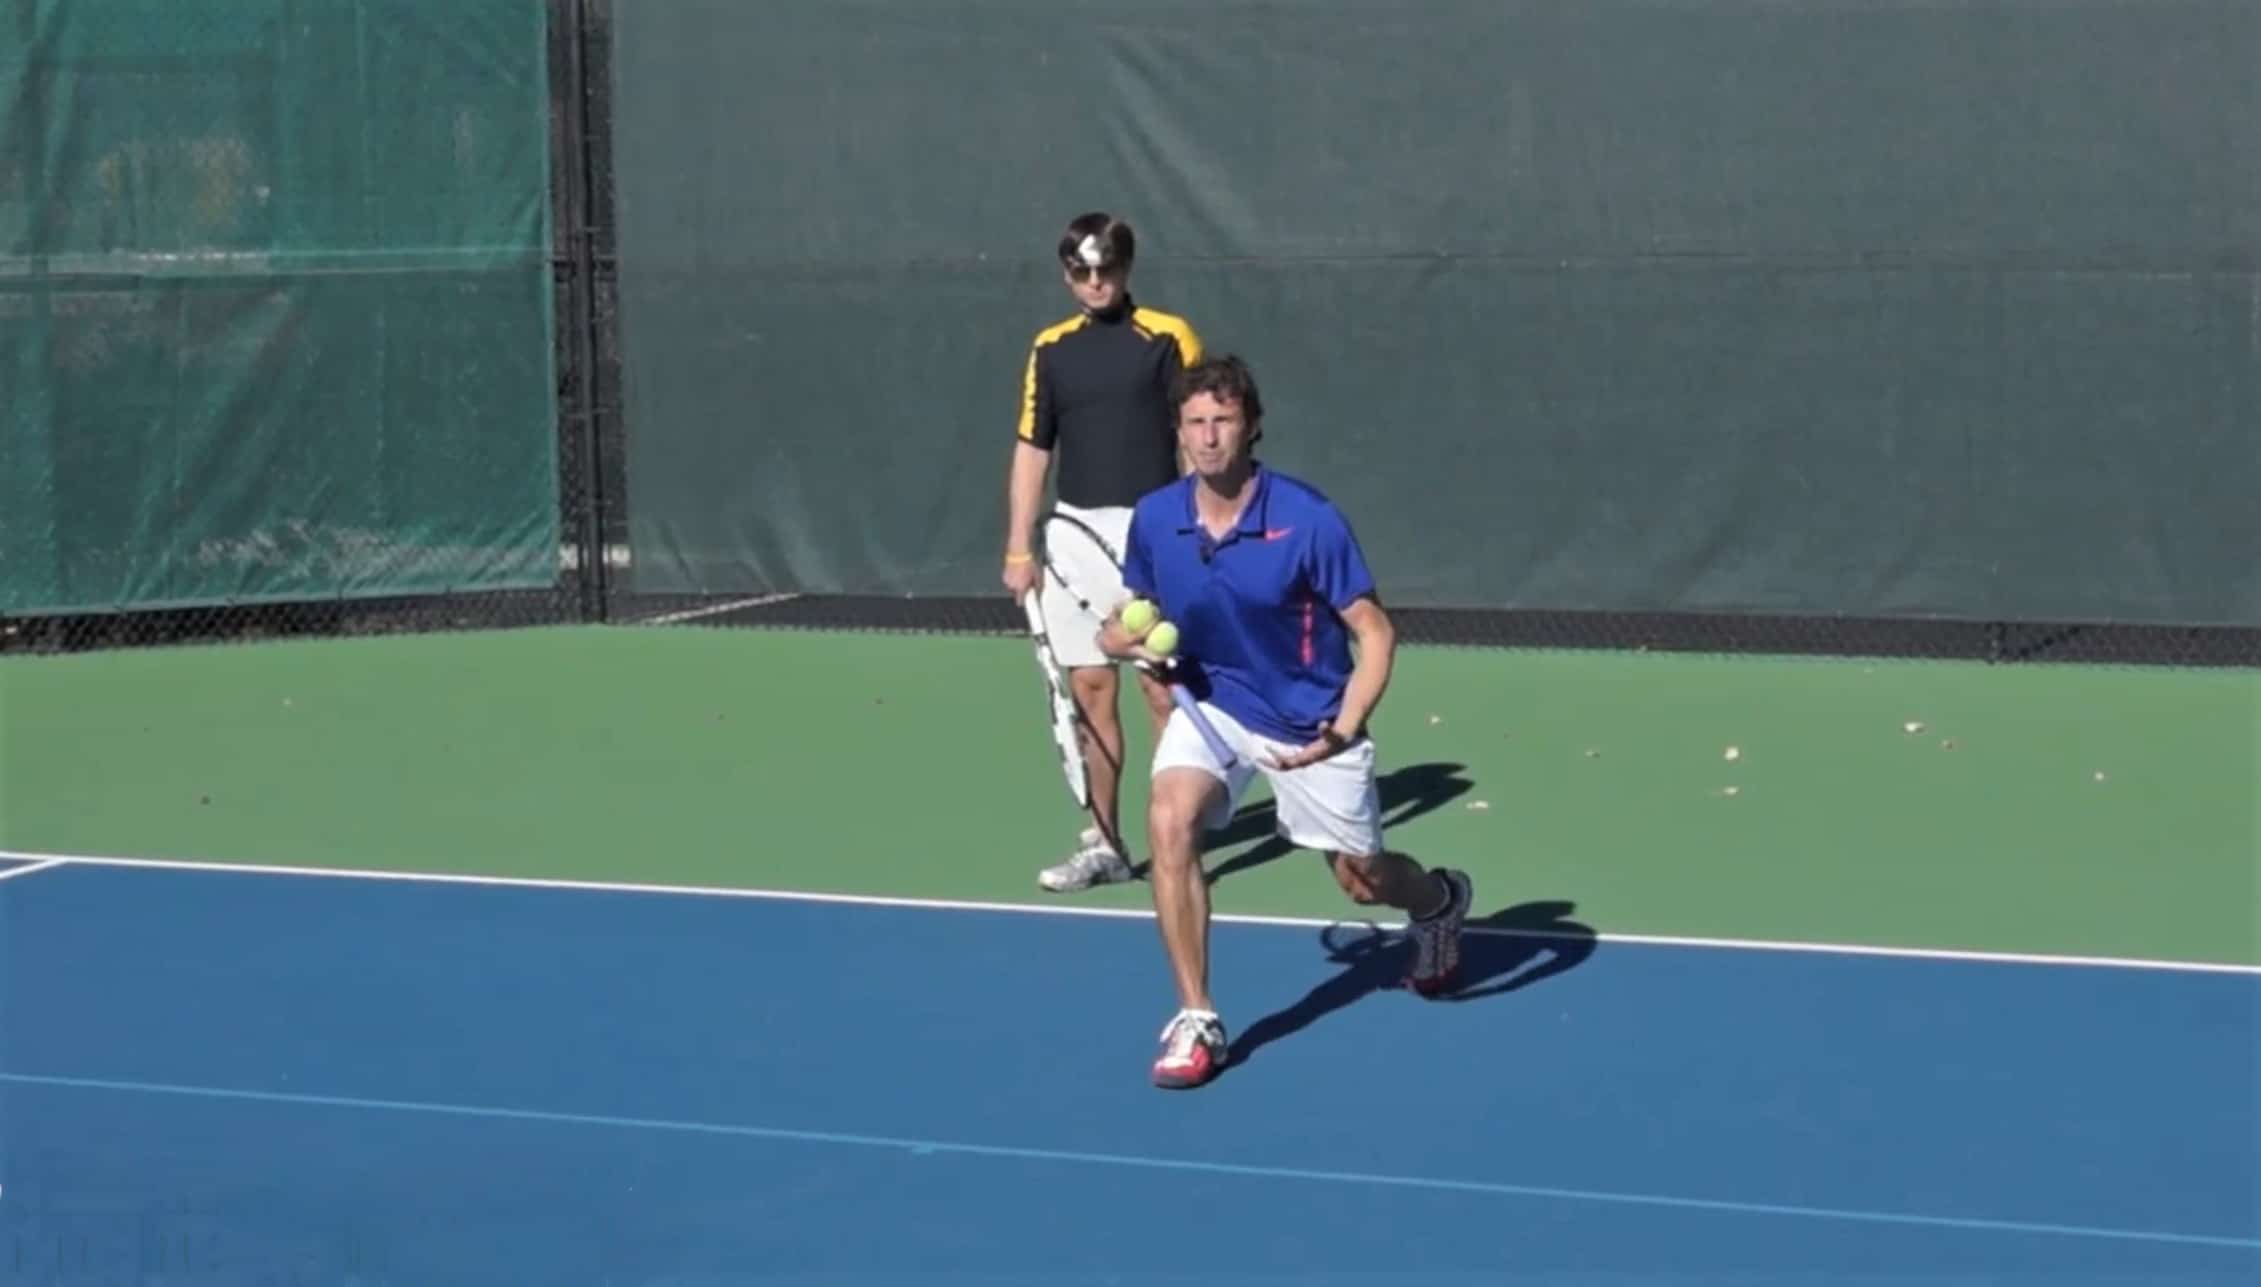 Jeff Salzenstein demonstrating a low lunge to a tennis player.